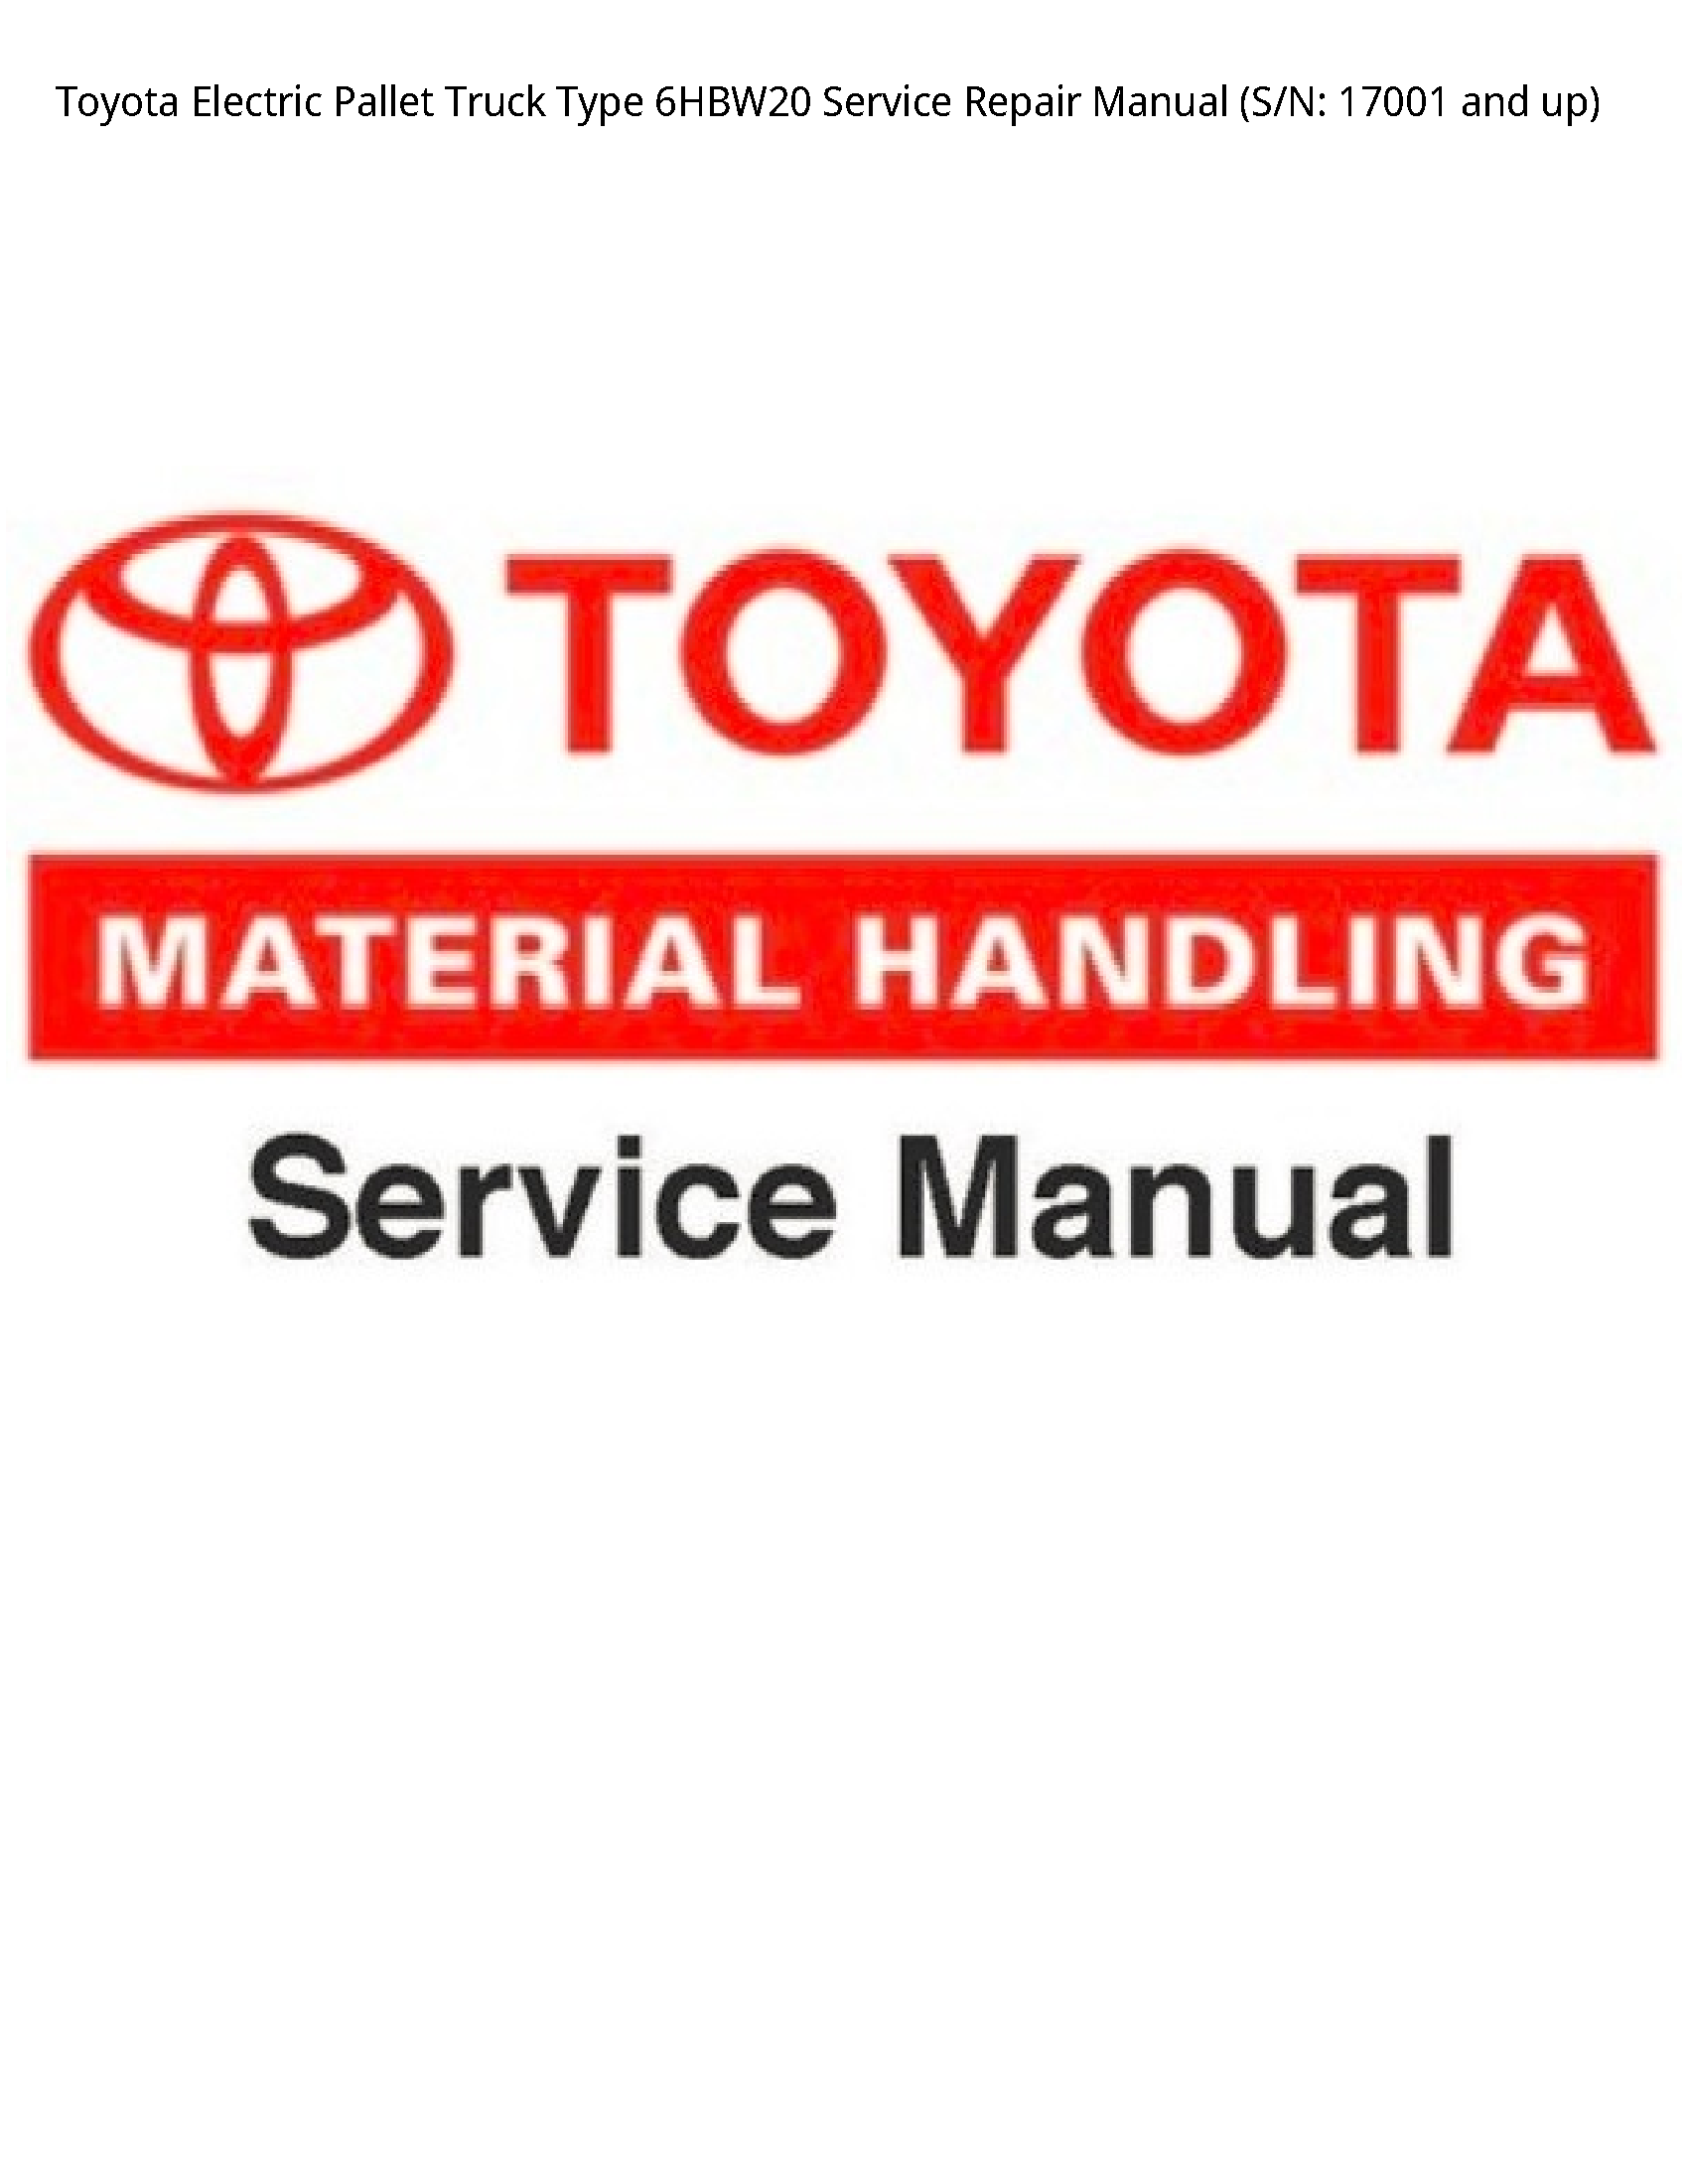 Toyota 6HBW20 Electric Pallet Truck Type manual